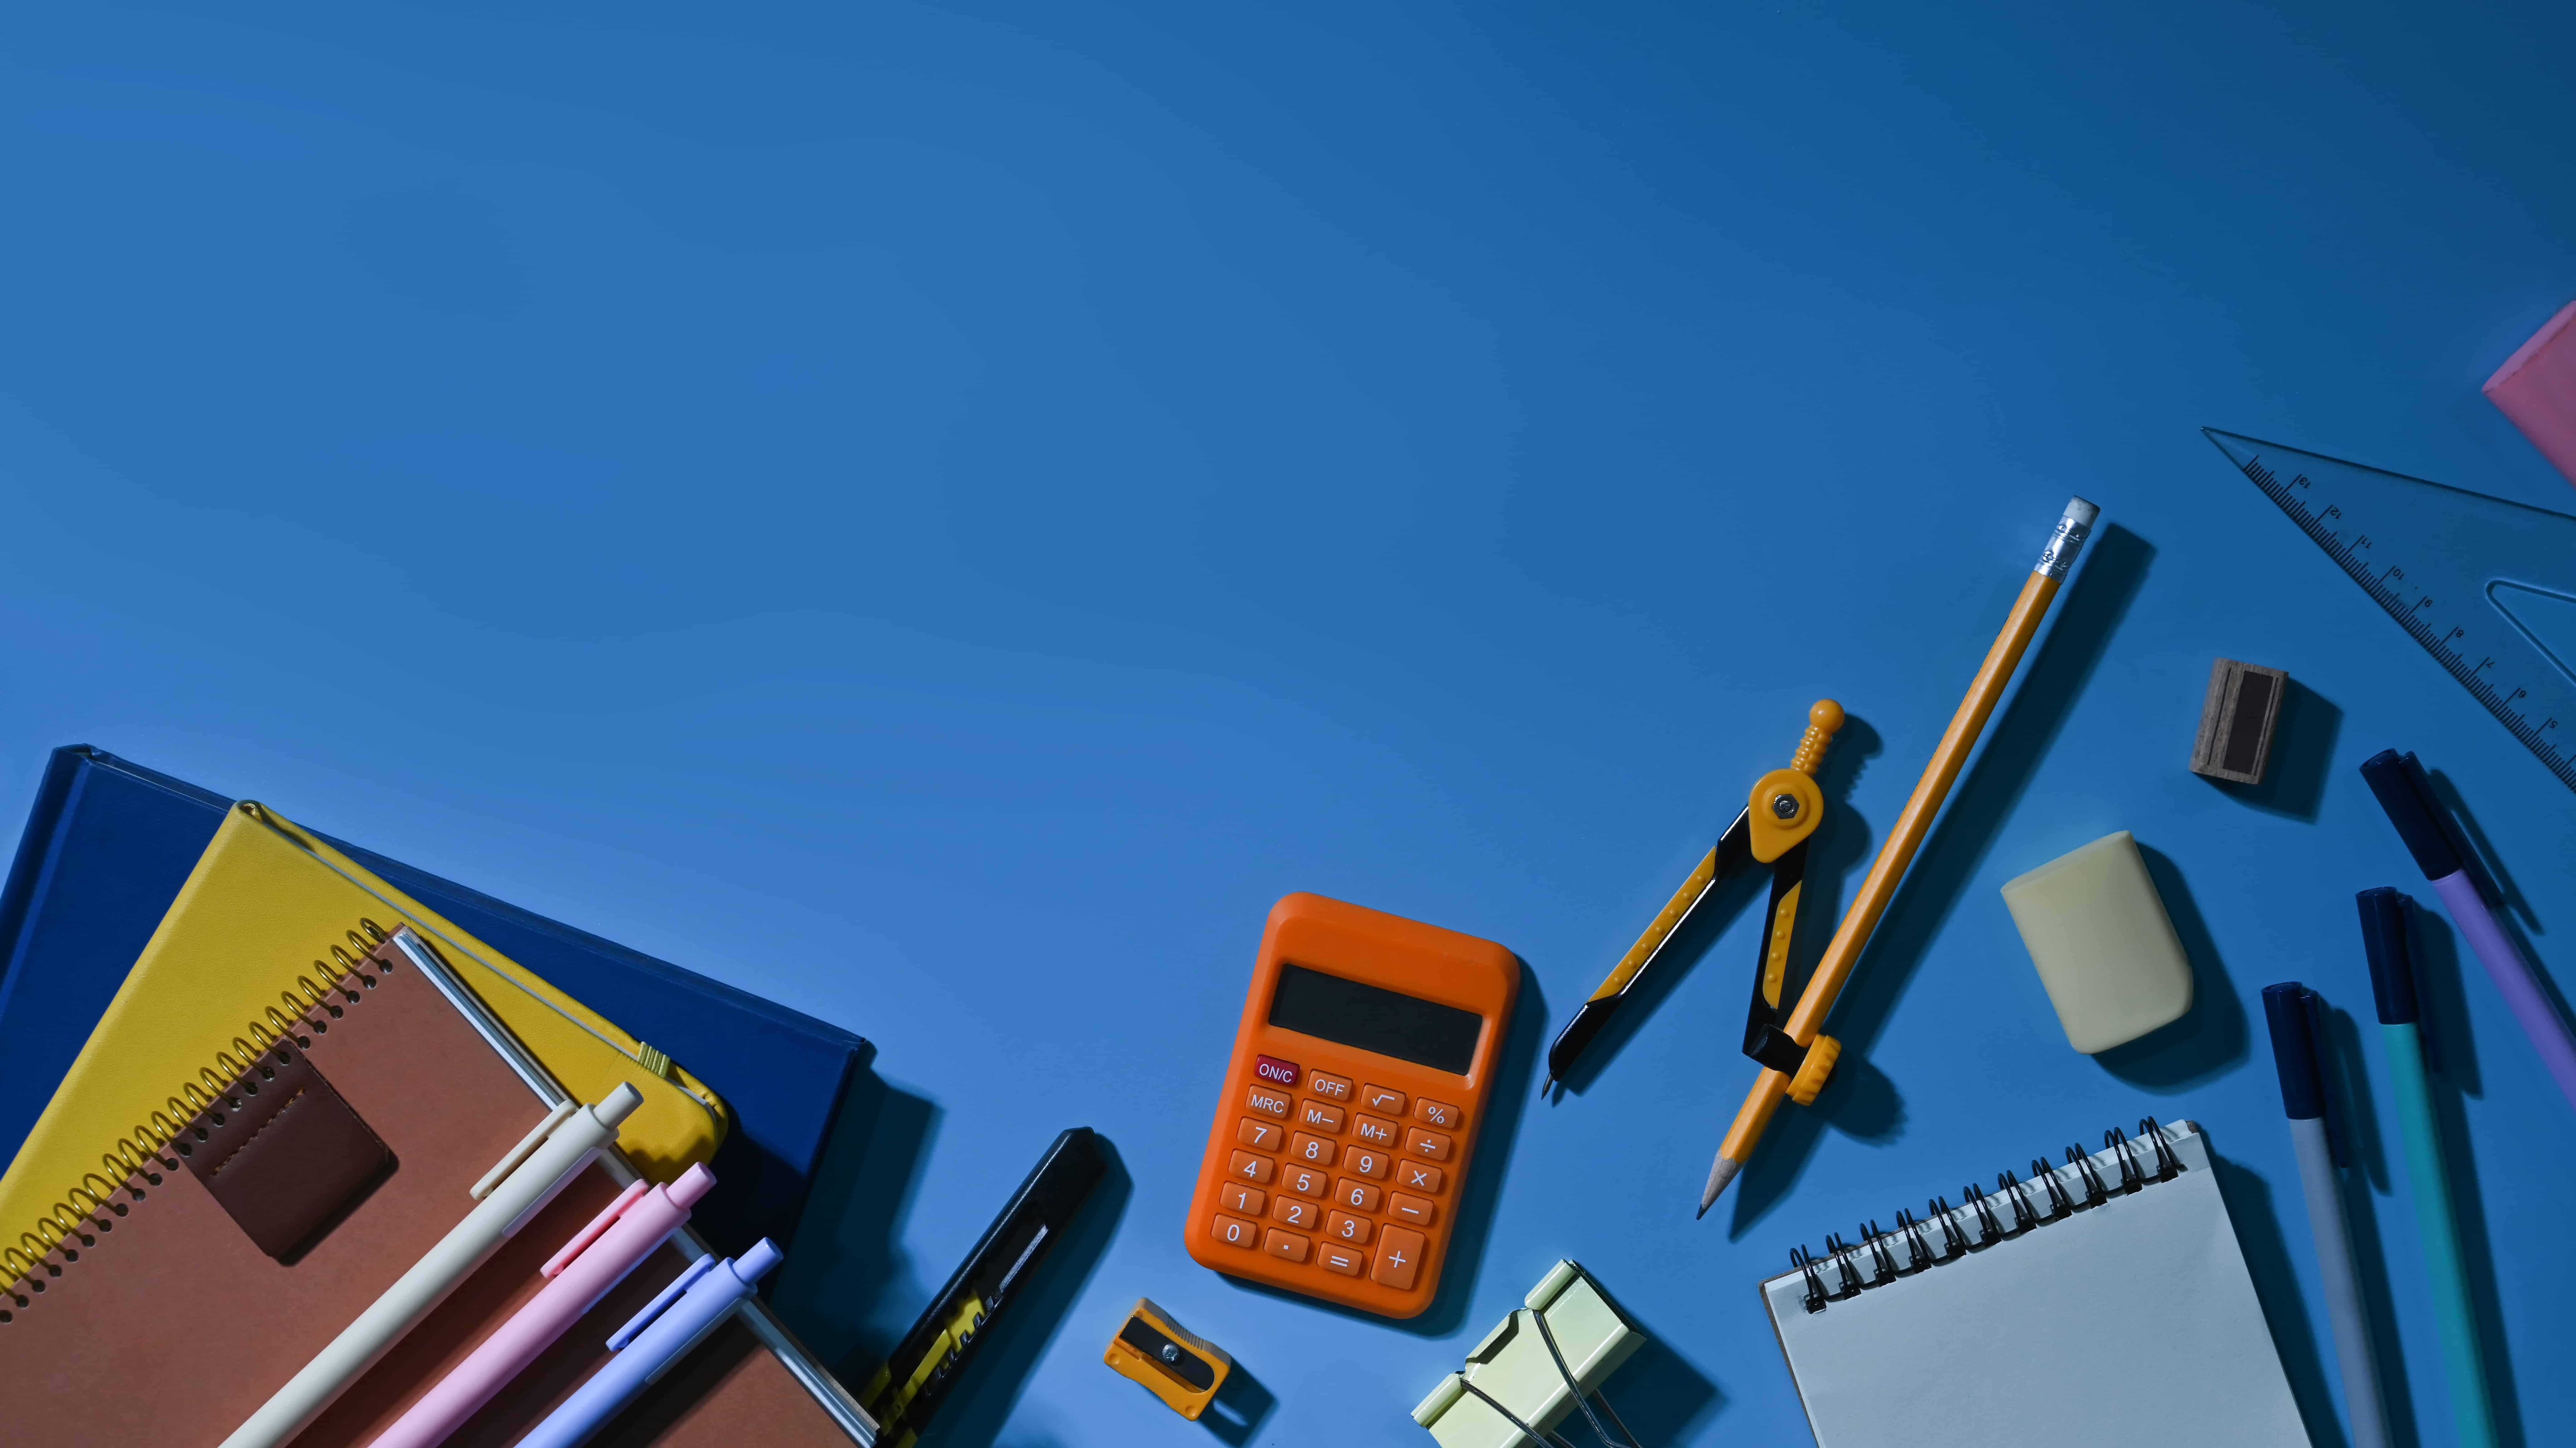 Top view of various school supplies on a blue background with empty space ready for your design.